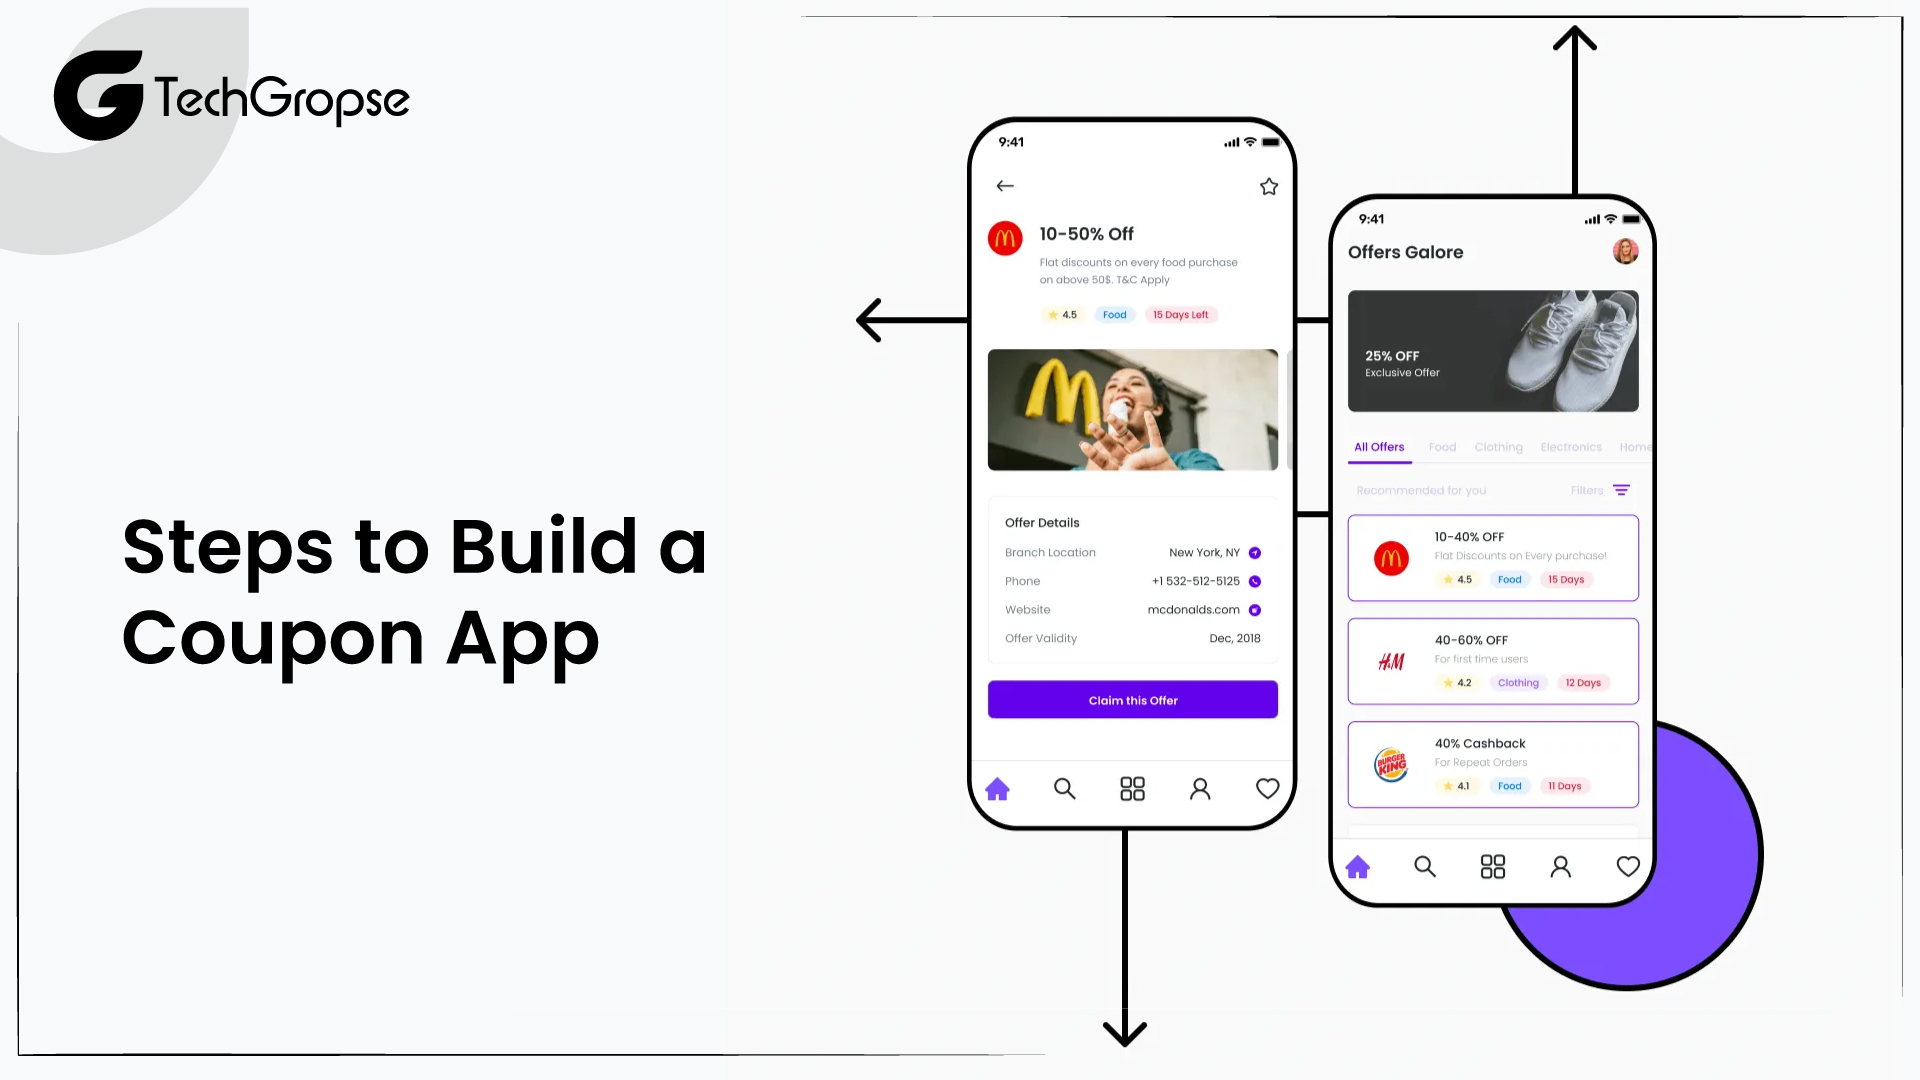 Steps to Build a Coupon App